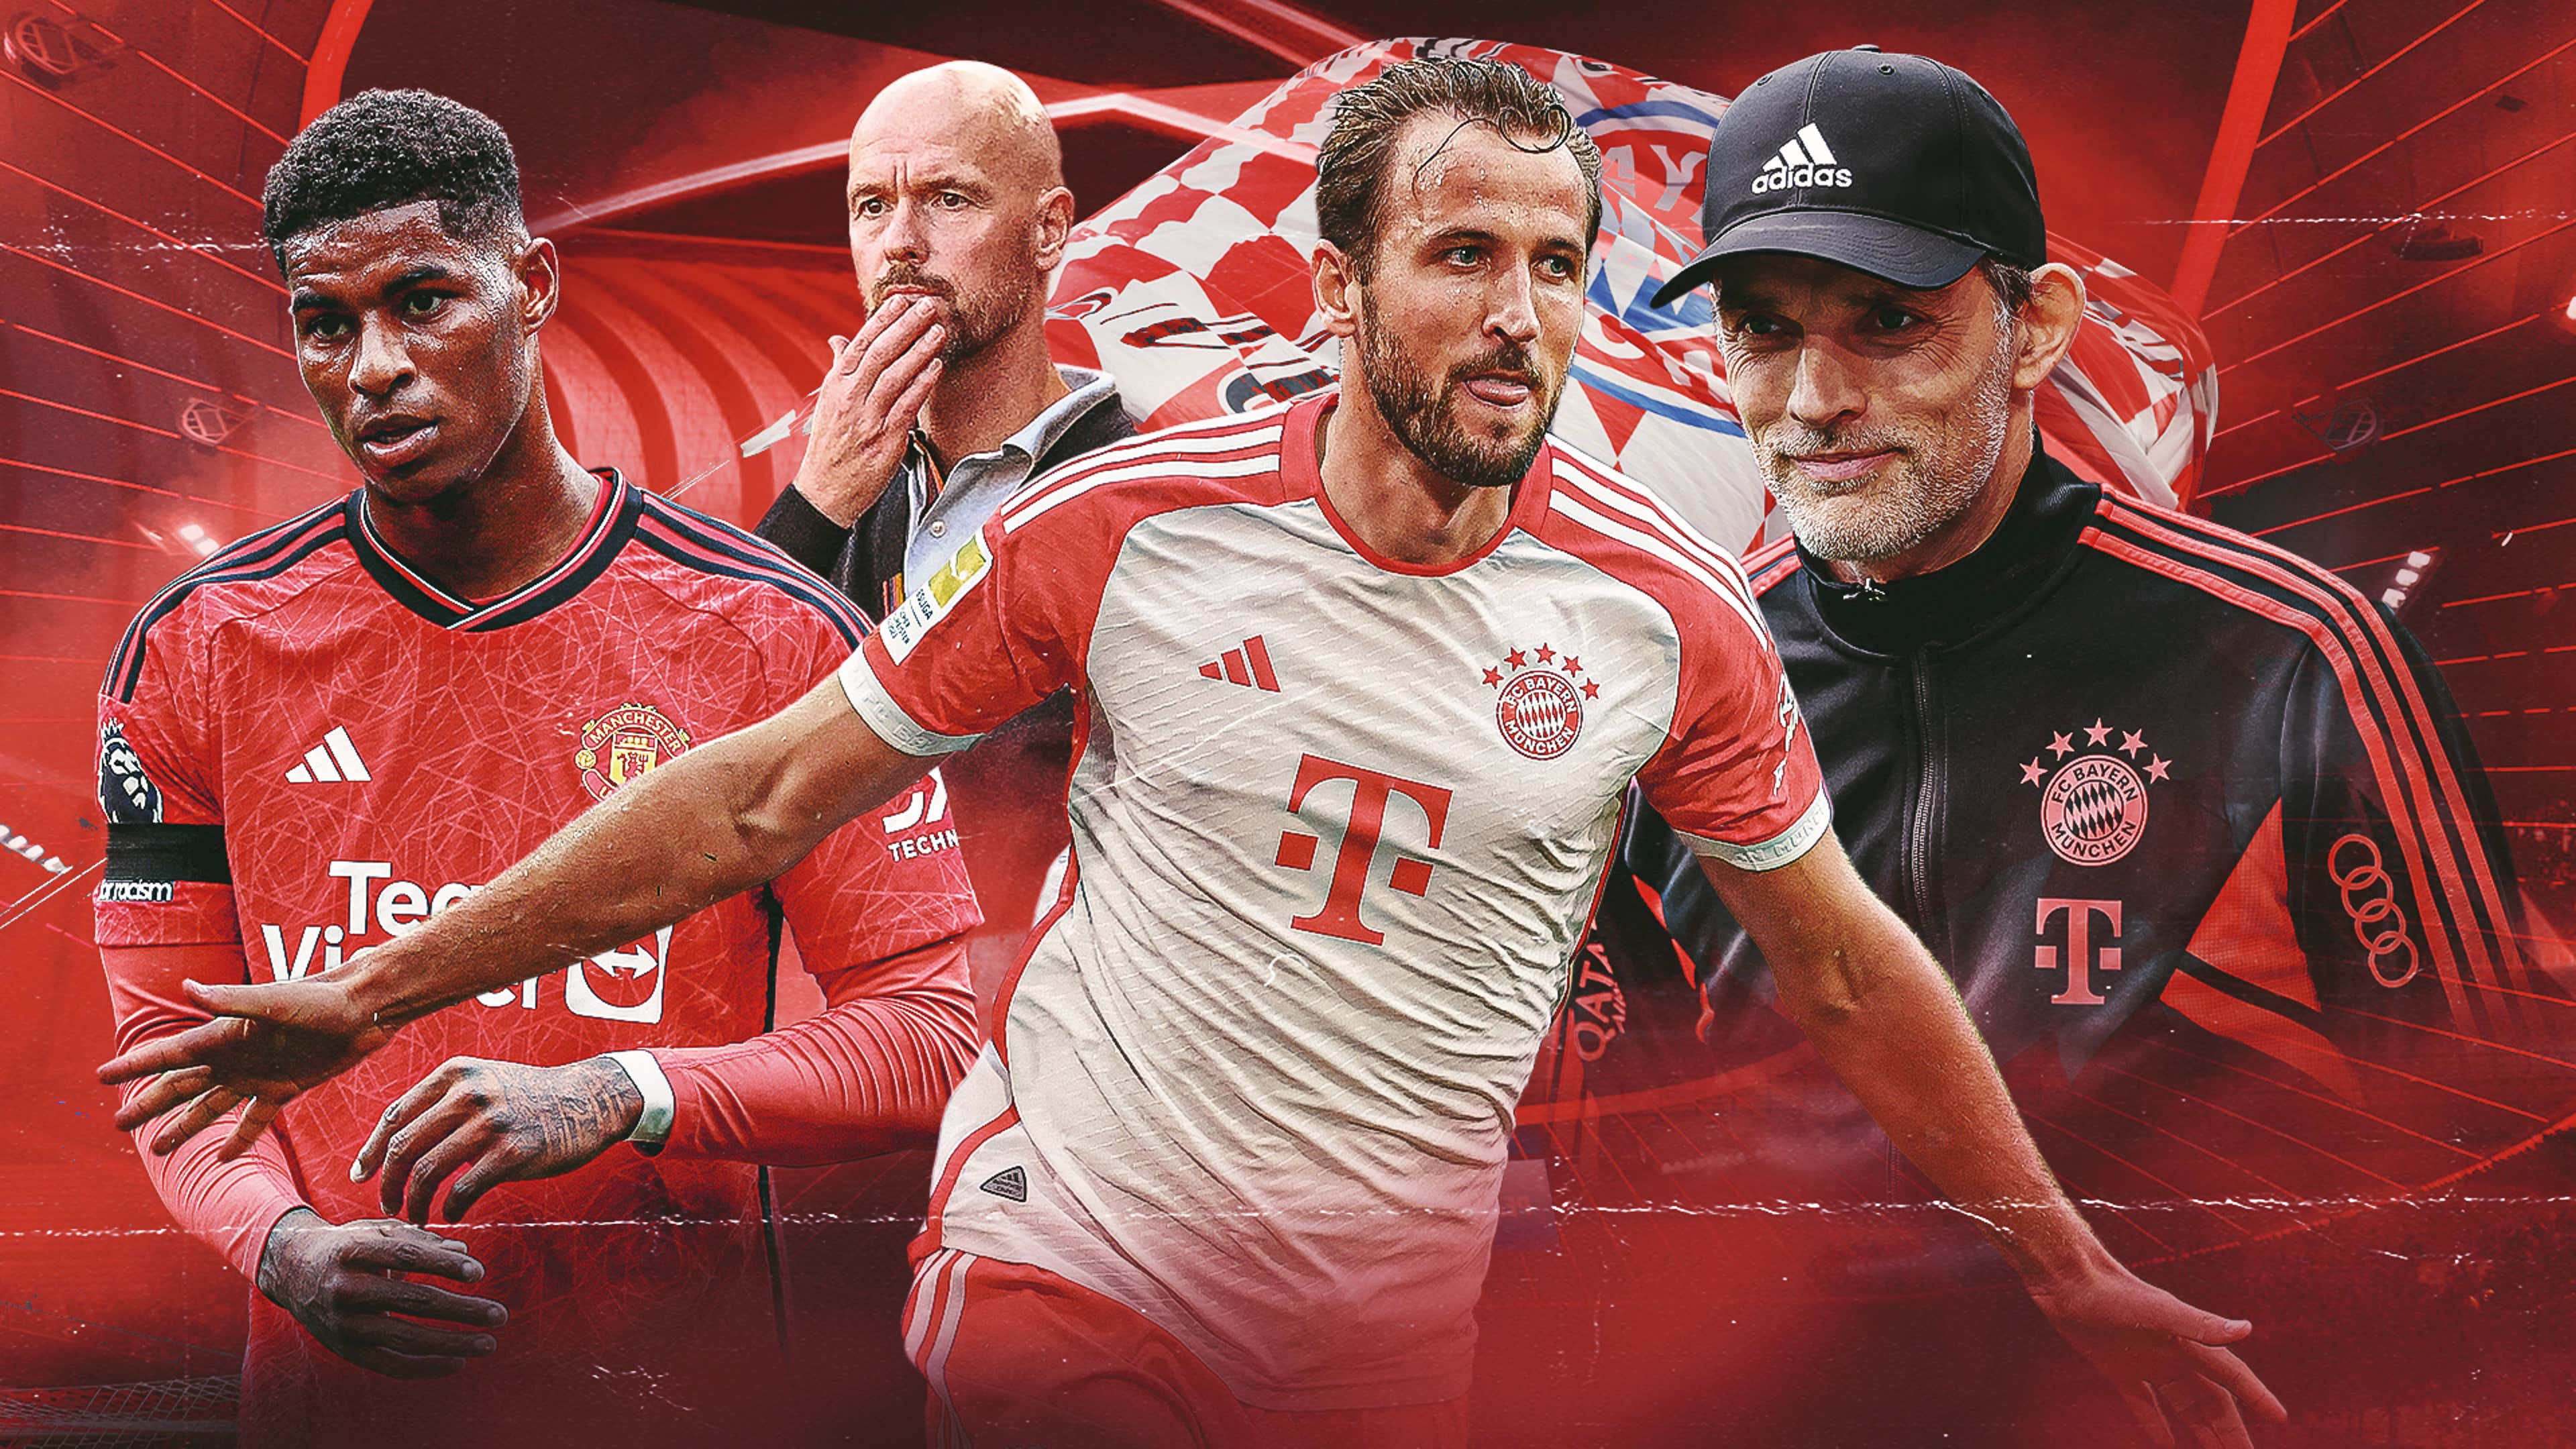 Munich keen to stage the 2021 Champions League final